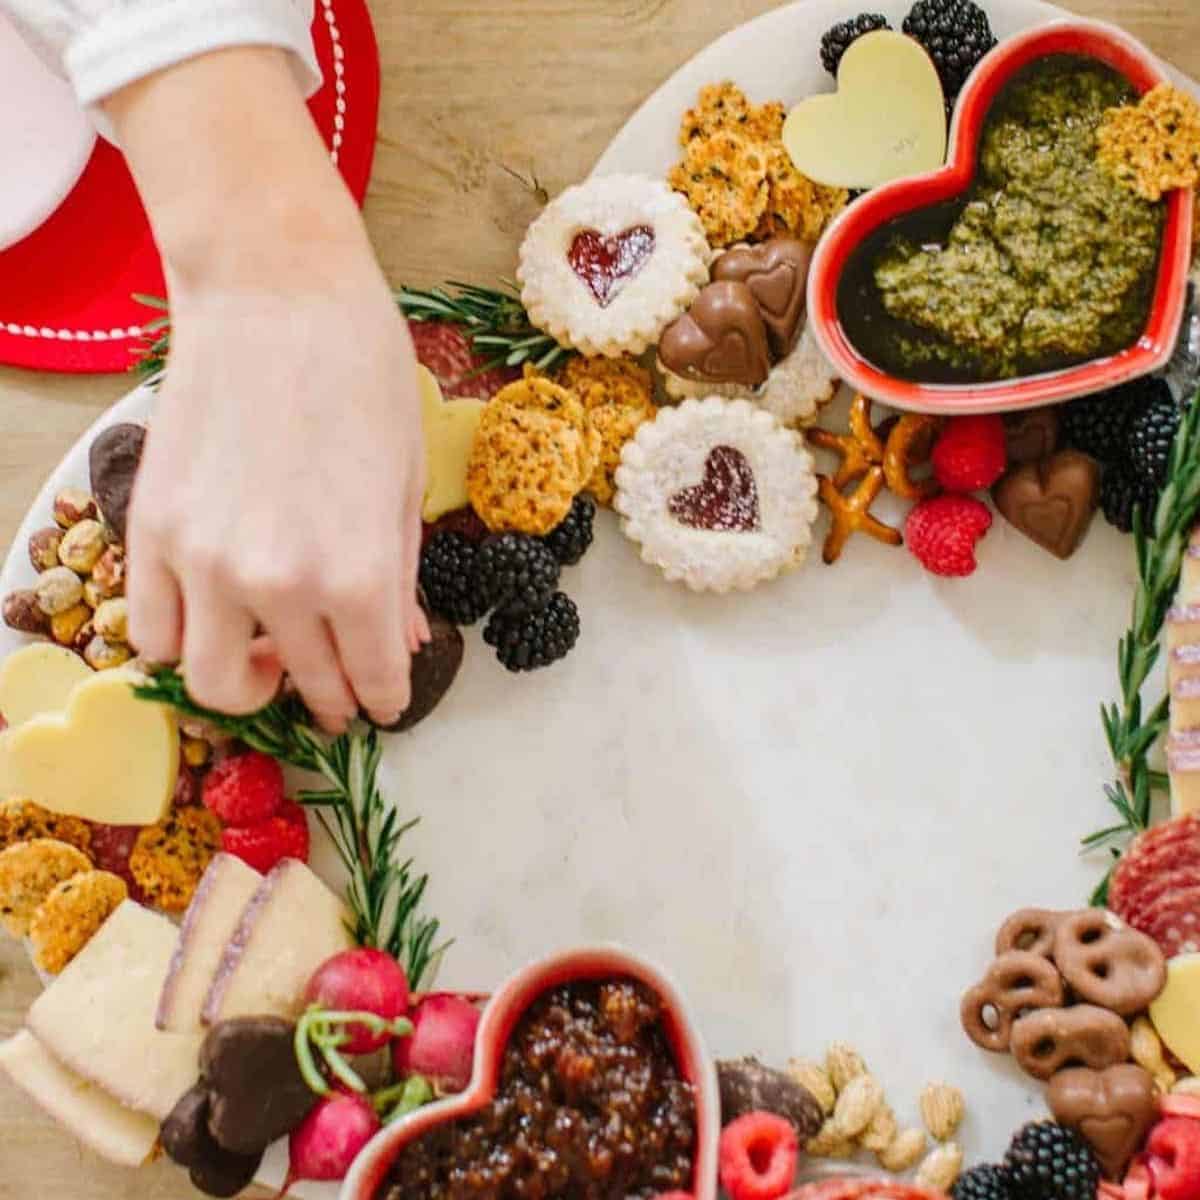 Valentines Charcuterie Board (20 minutes)